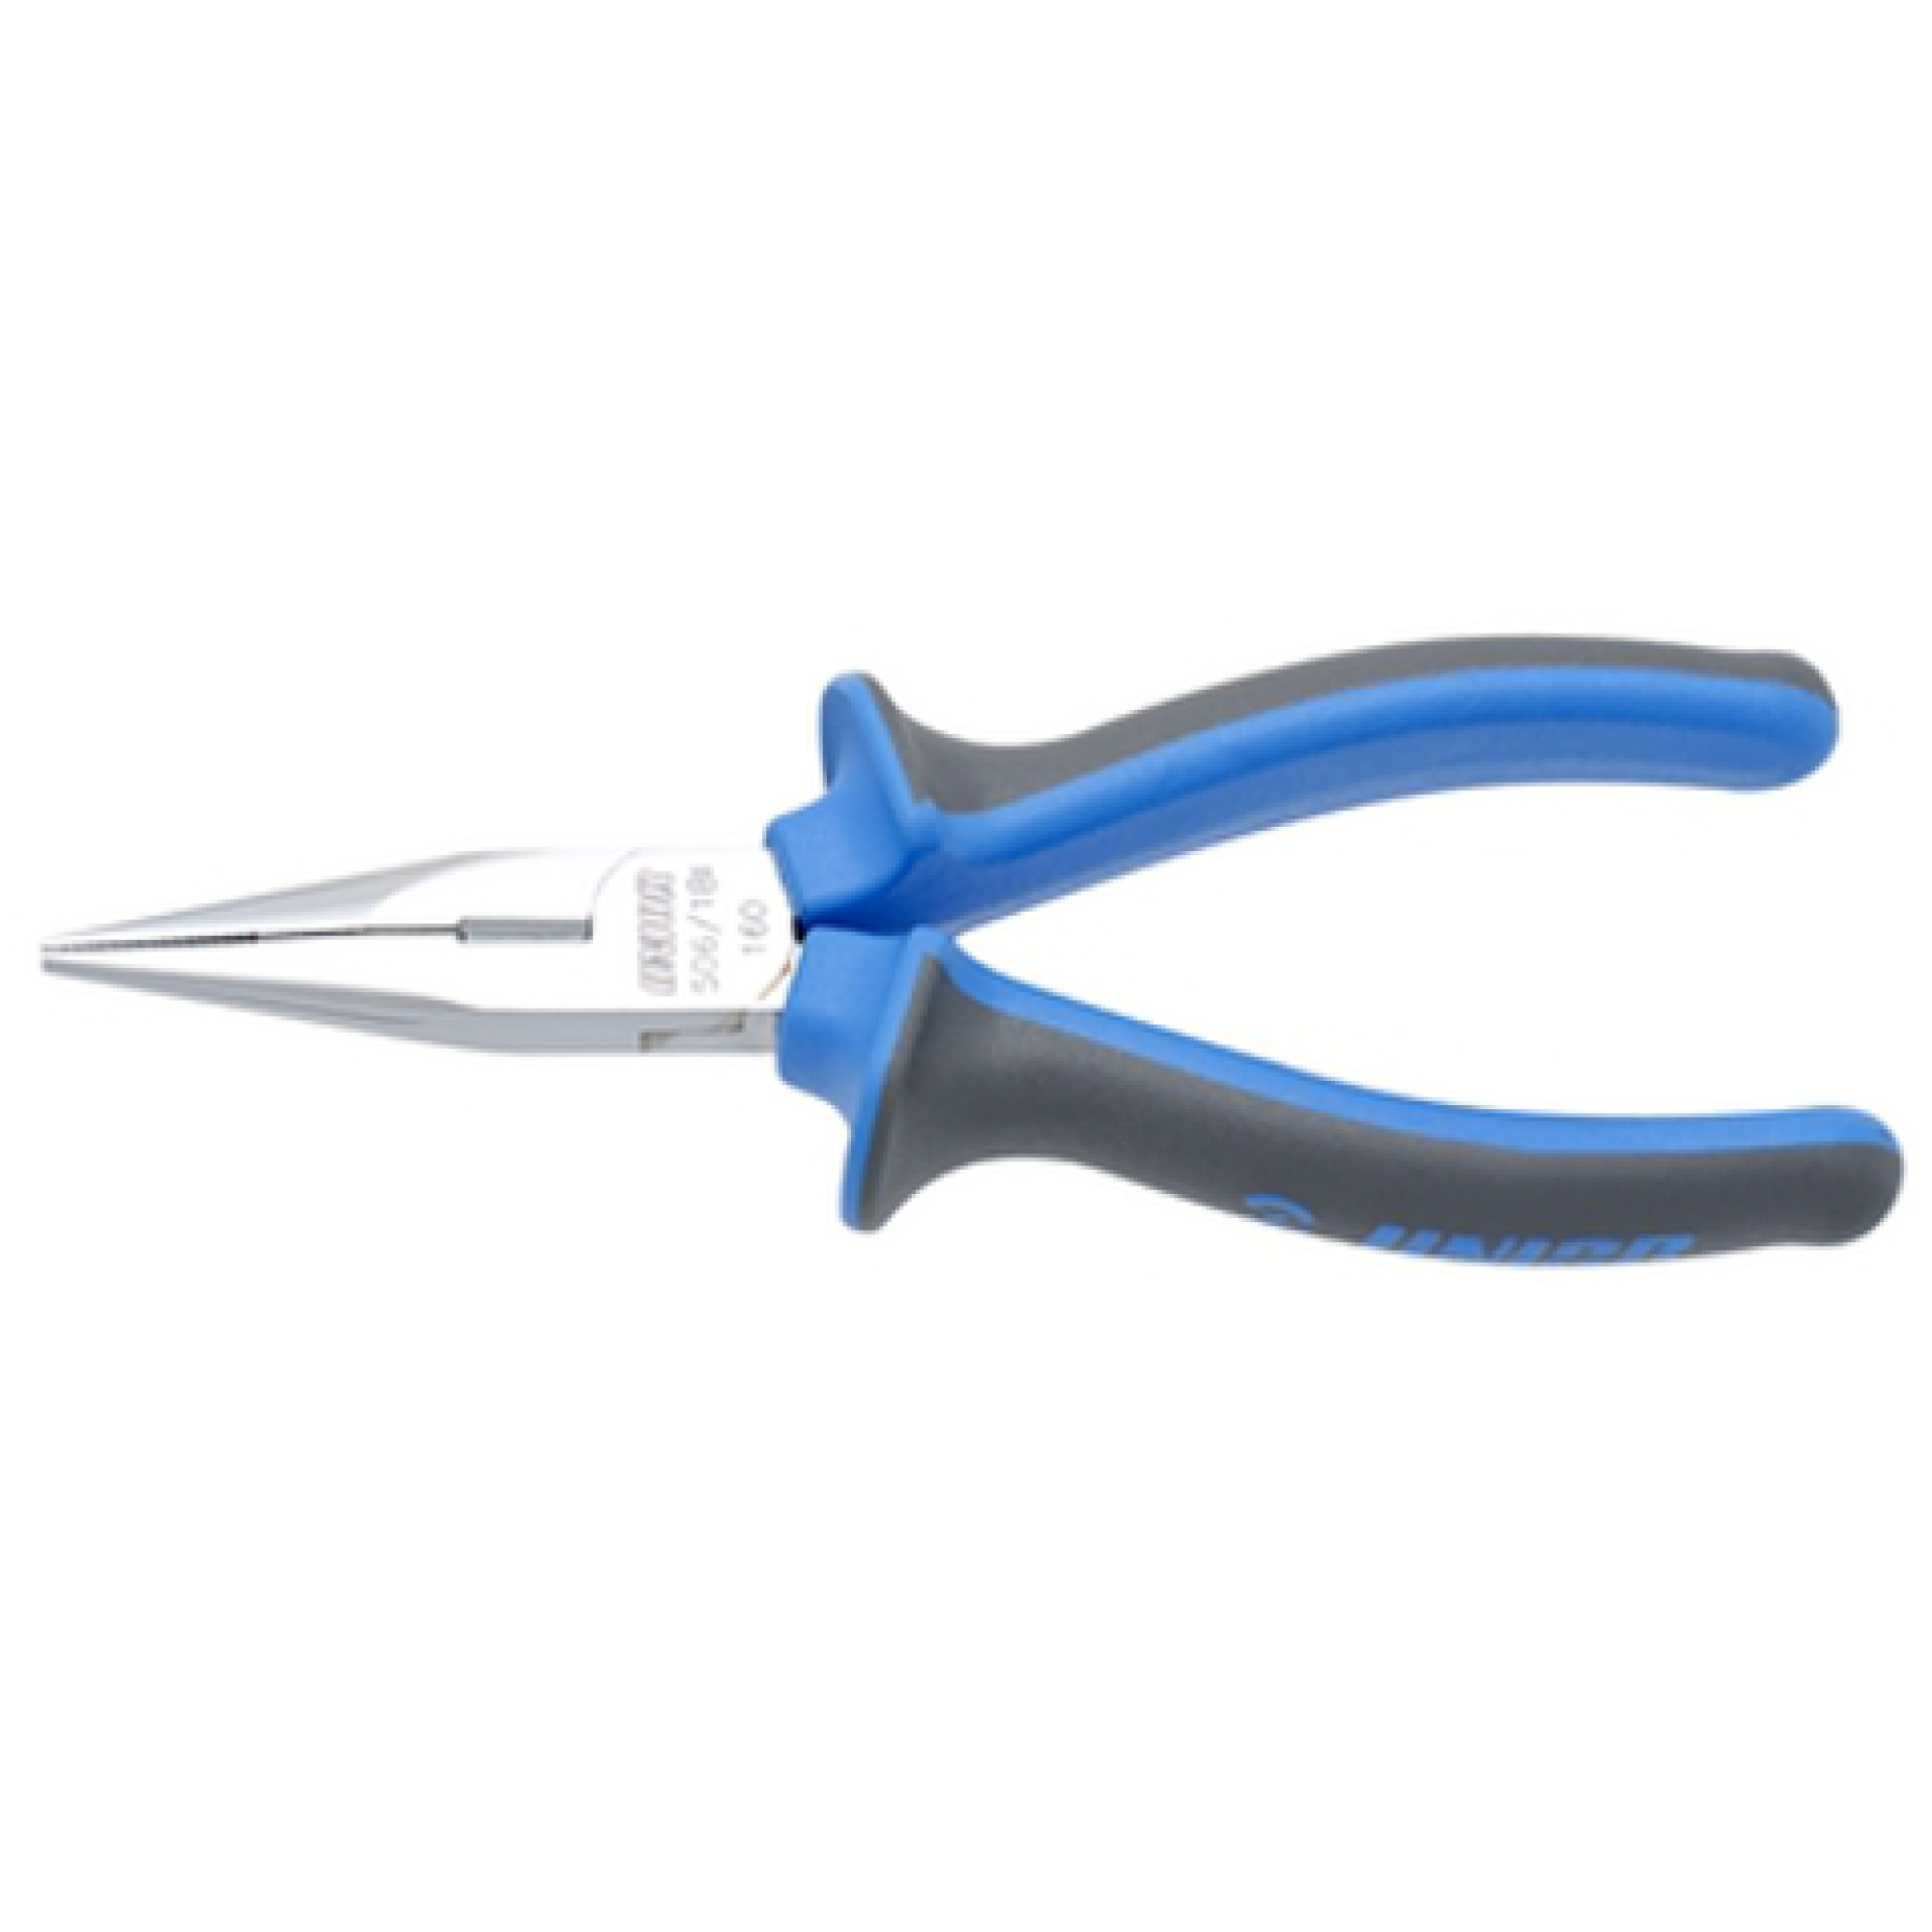 Long nose pliers with side cutter